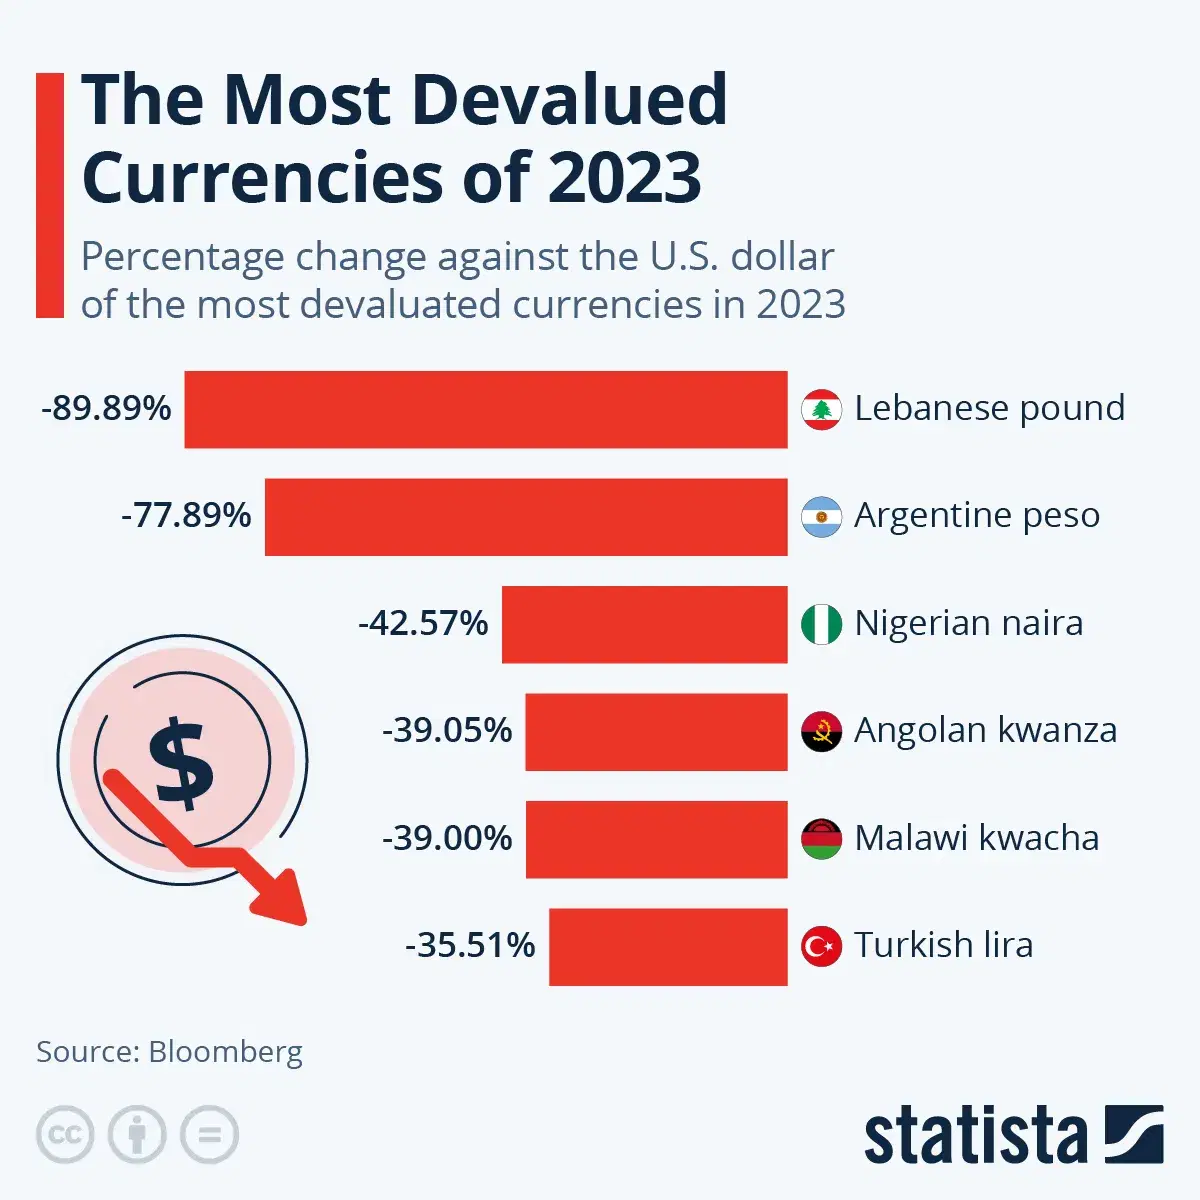 The Most Devalued Currencies of 2023